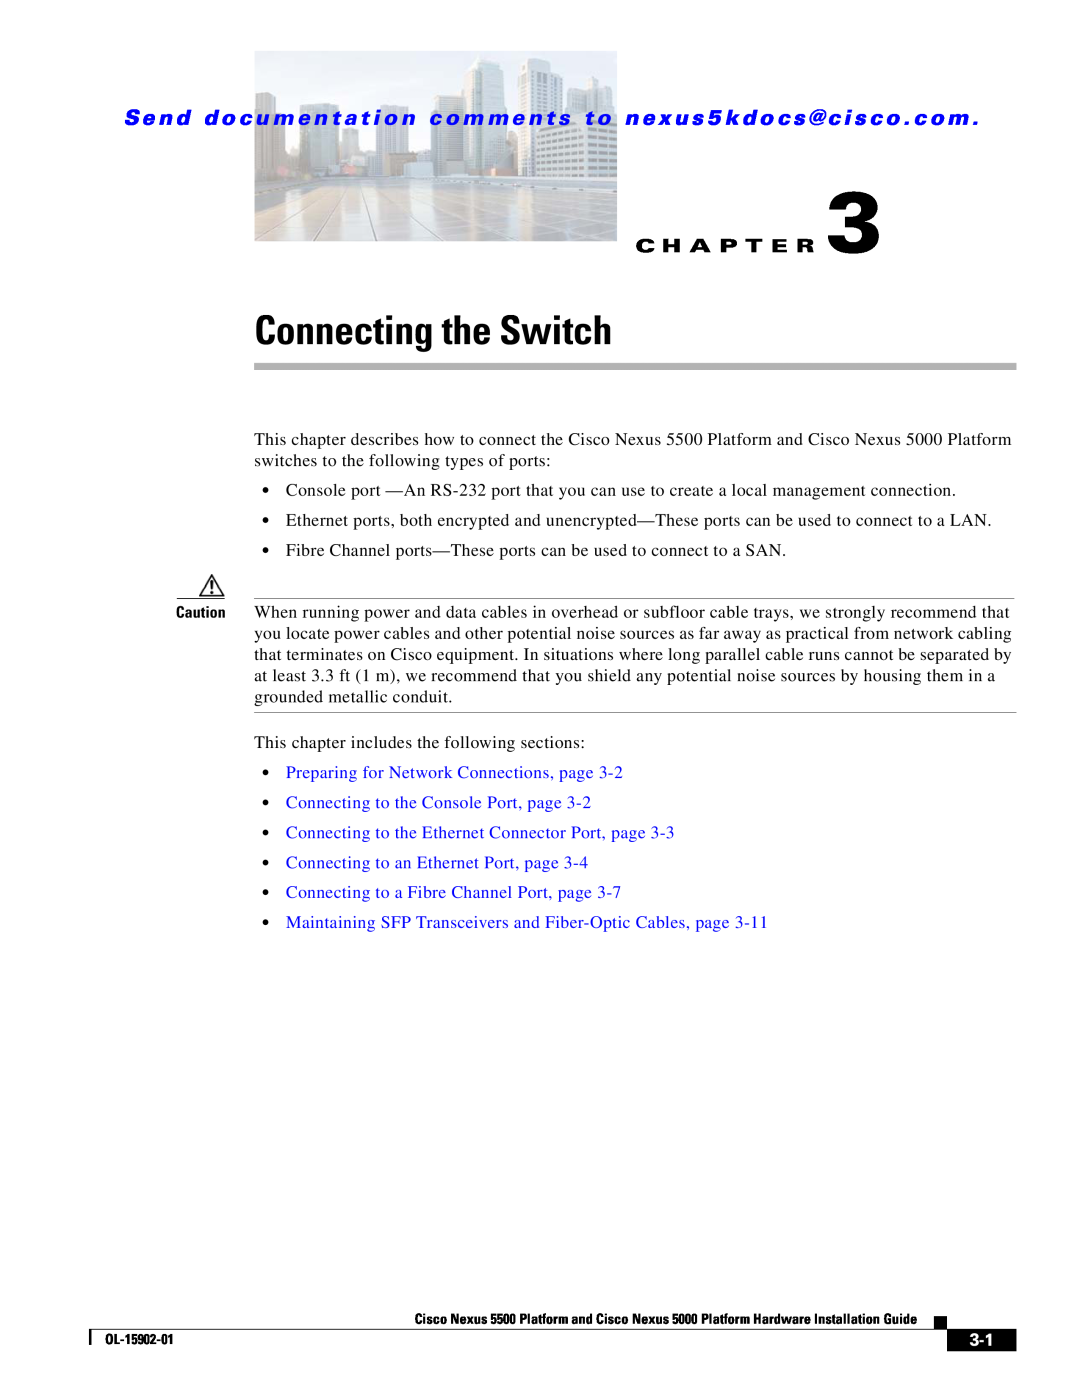 Cisco Systems 5000 manual Connecting the Switch, C H A P T E R, Preparing for Network Connections, page 